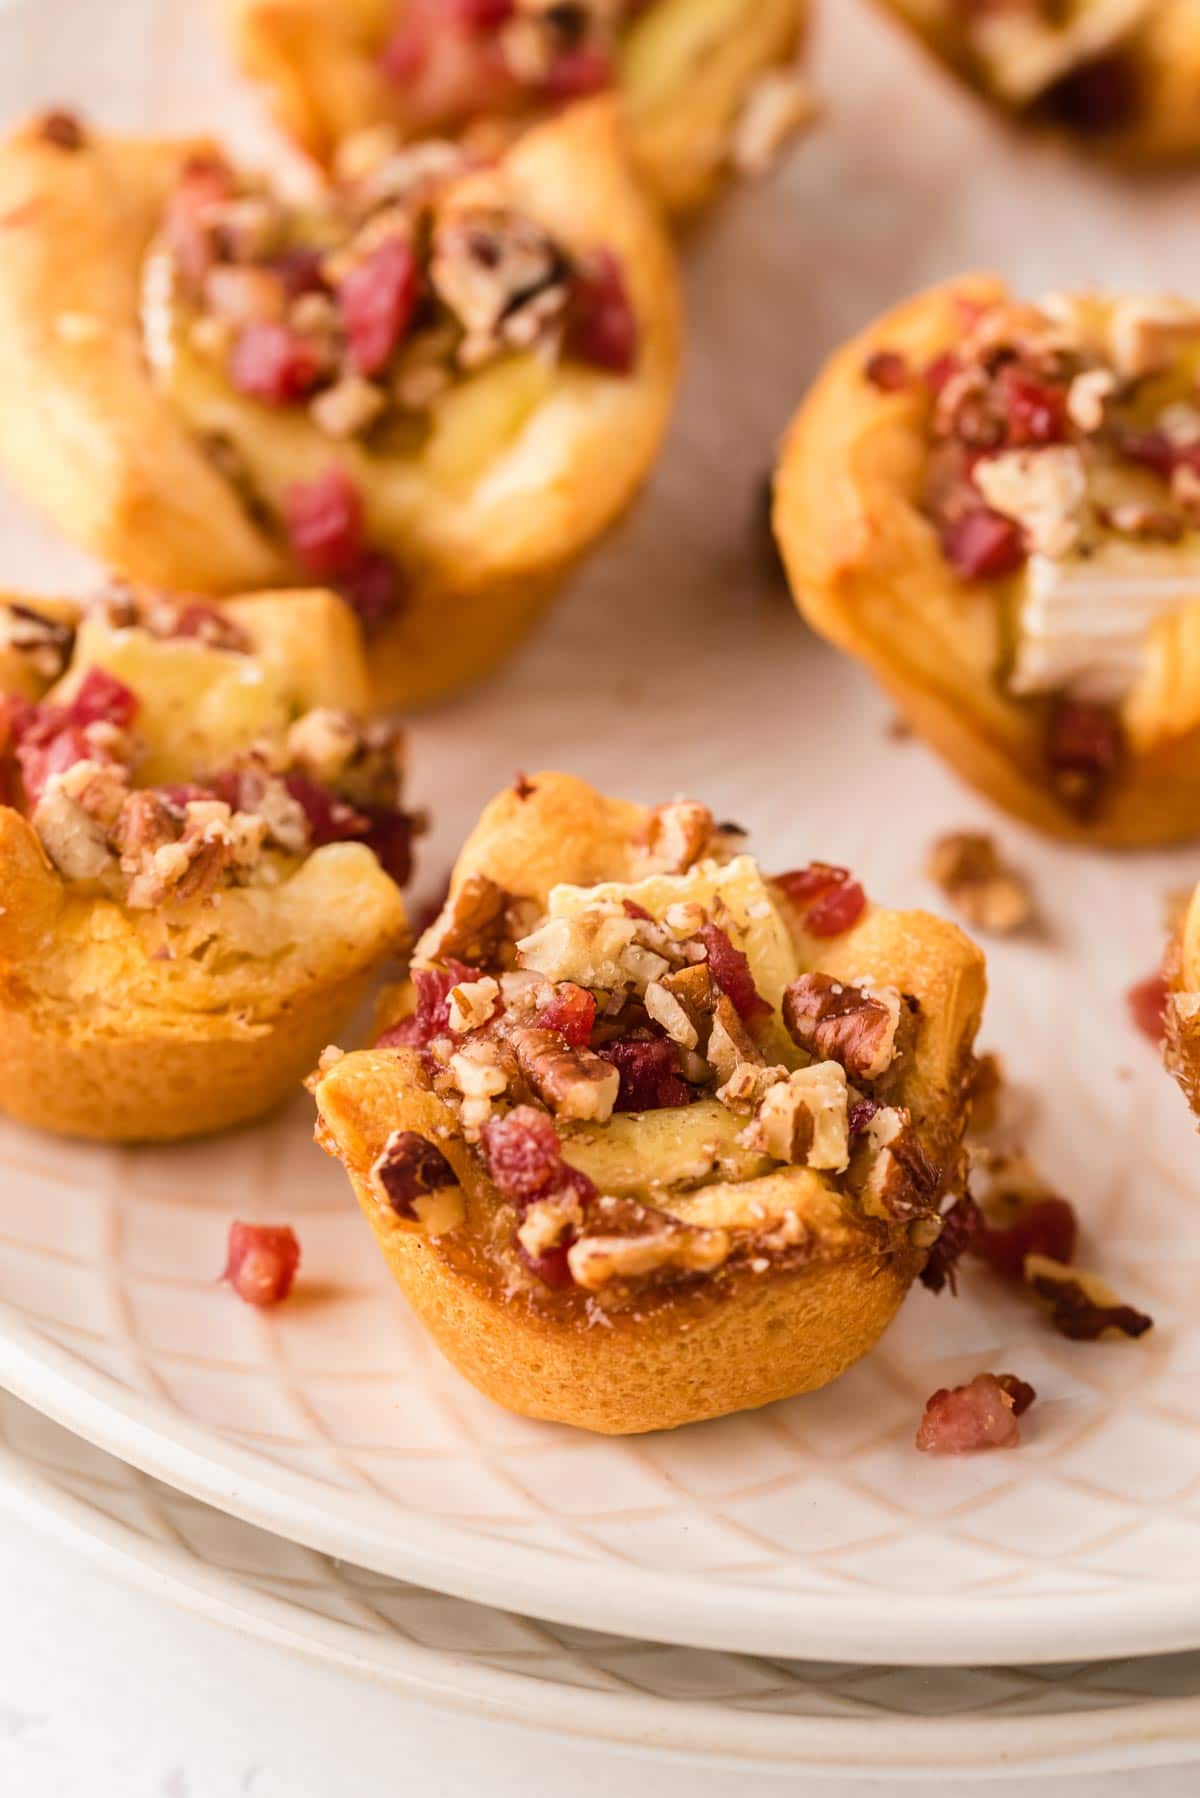 Bacon brie bites on a plate